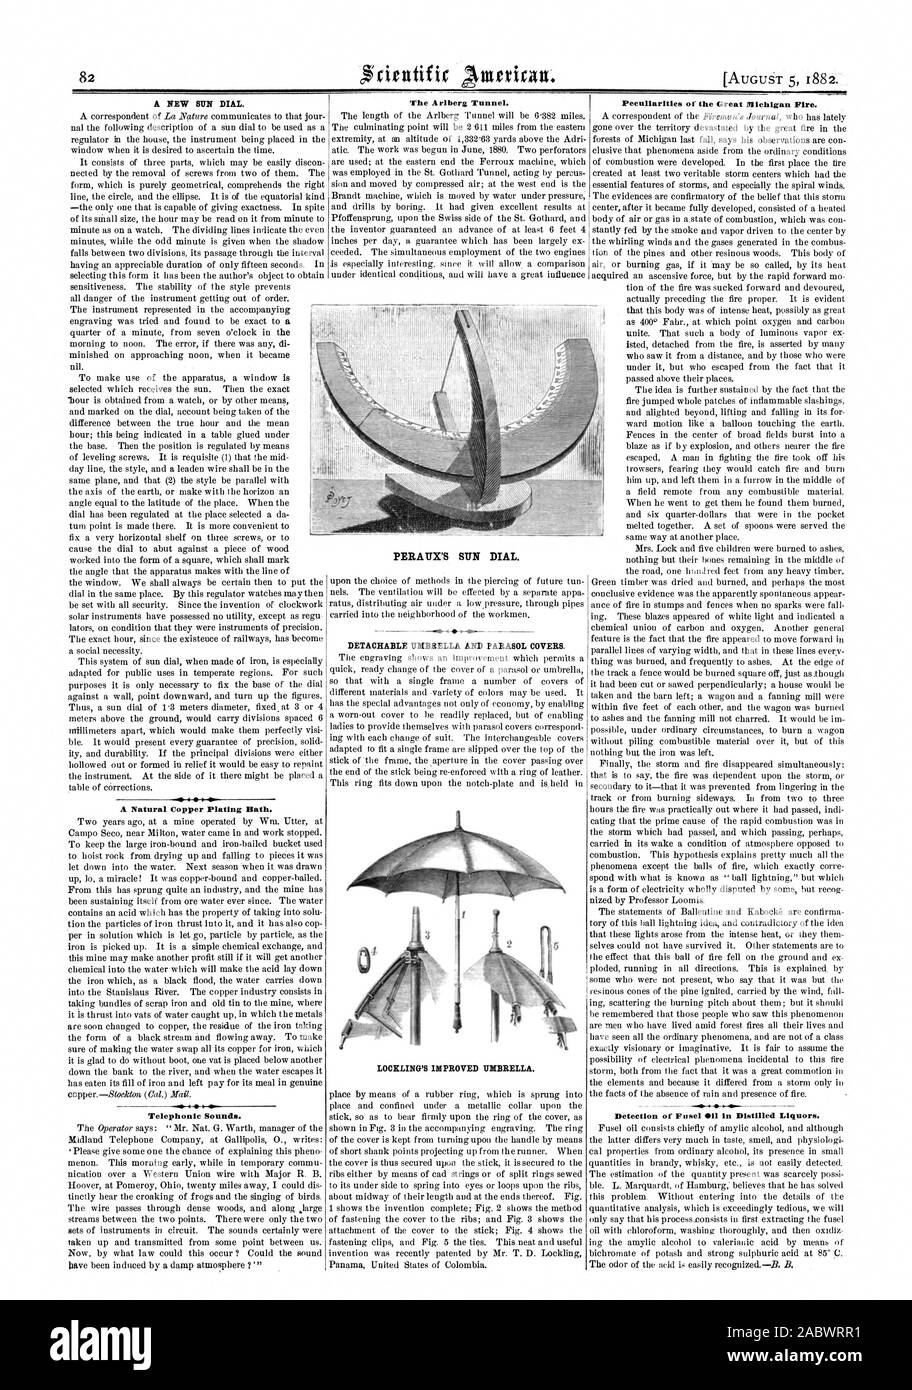 A NEW SUN DIAL. The Arlberg Tunnel. Peculiarities of the Great Michigan Fire. A Natural Copper Plating Bath. Telephonic Sounds. PERAUX'S SUN DIAL. DETACHABLE UMBRELLA AND PARASOL COVERS. Detection of Fusel Oil in Distilled Liquors., scientific american, 1882-08-05 Stock Photo